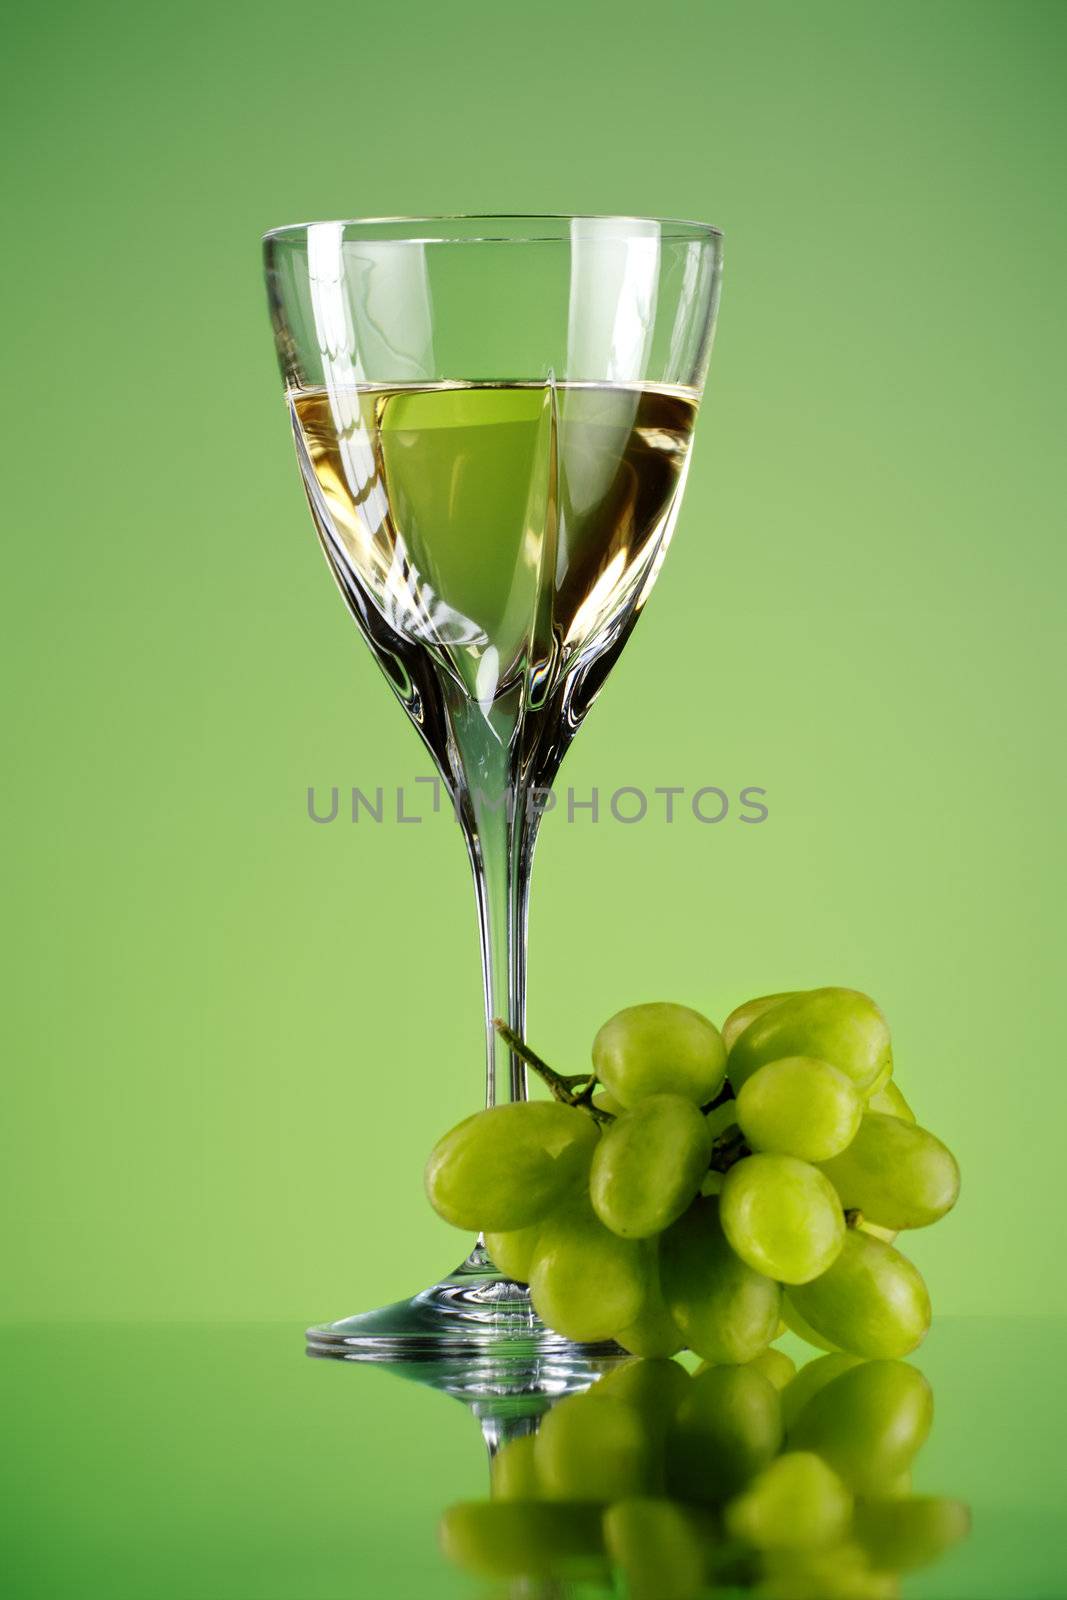 glass of wine and grape bunch by petr_malyshev